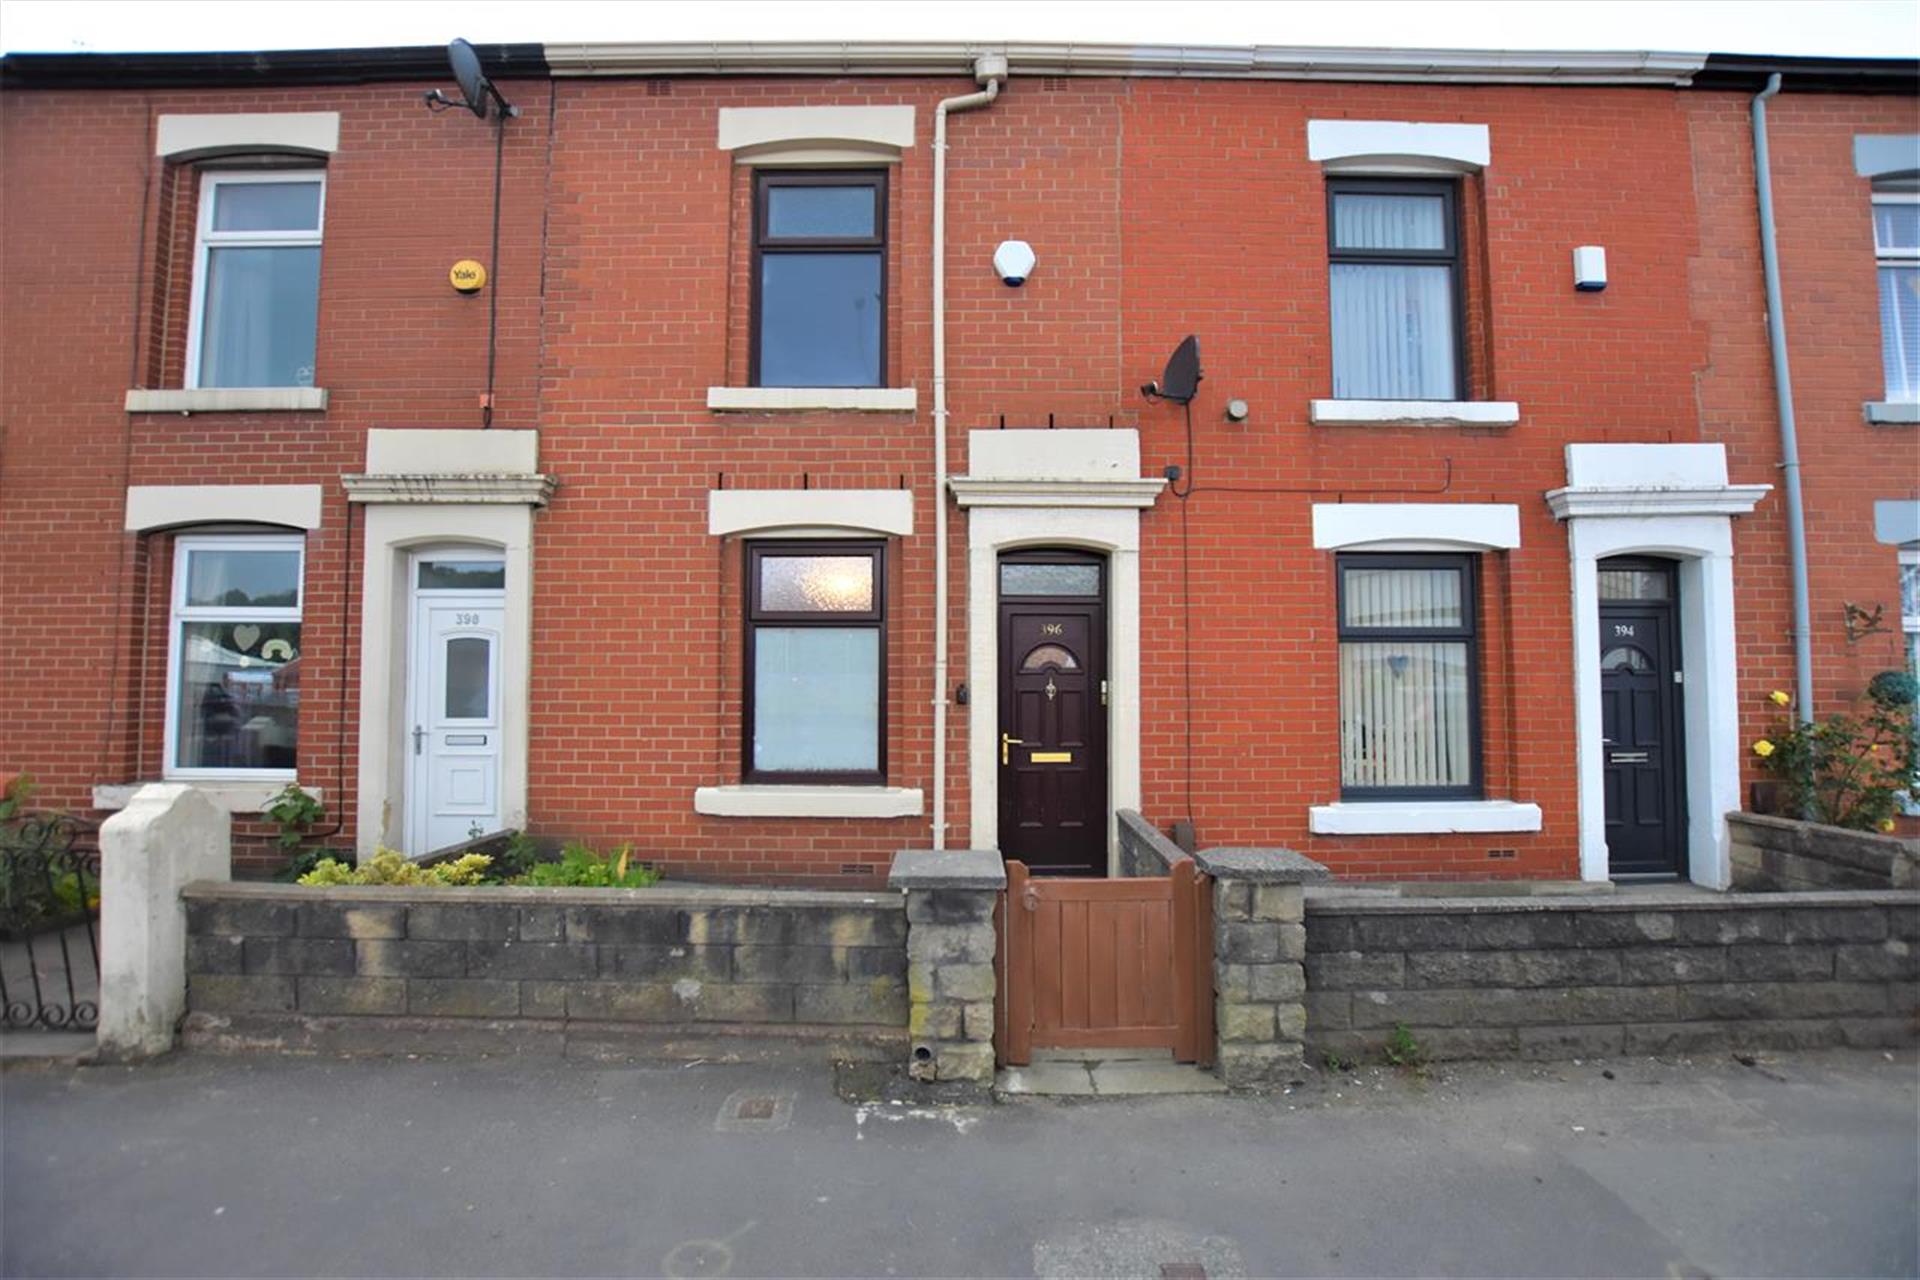 2 Bedroom Terraced House To Rent - Main Picture